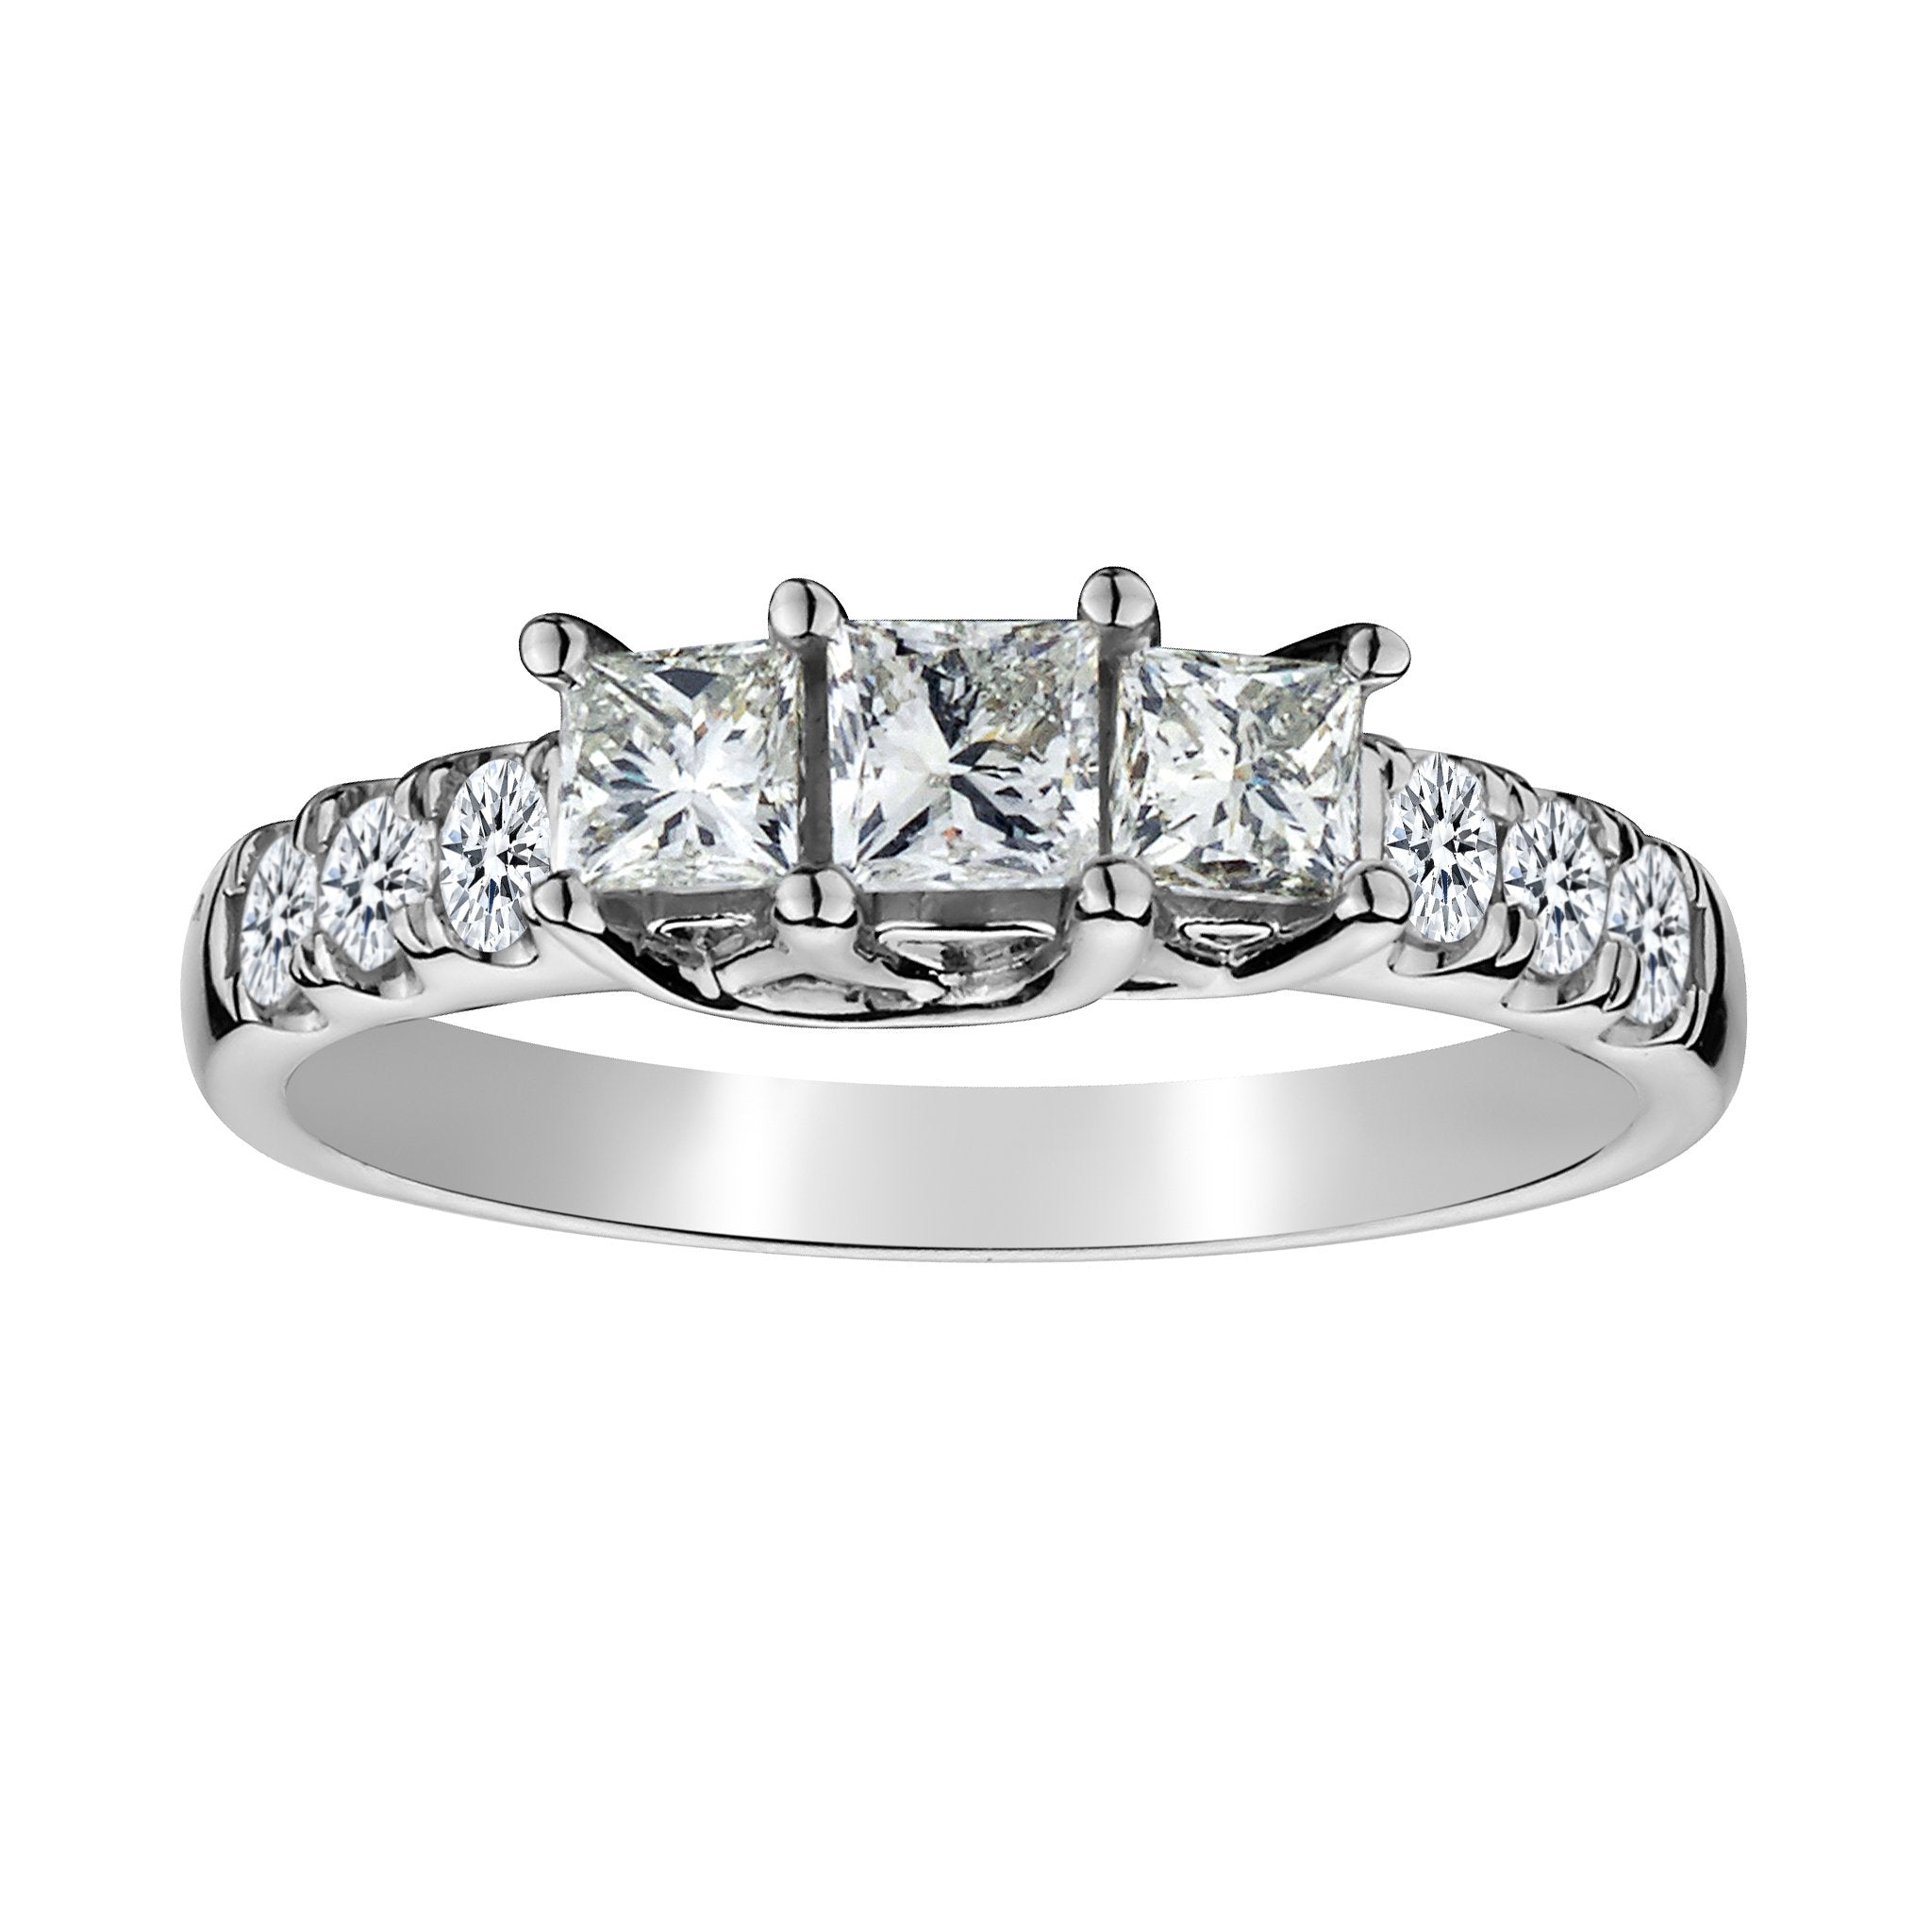 1.00 Carat of Diamonds "Past, Present, Future" Ring, 10kt White Gold.....................NOW